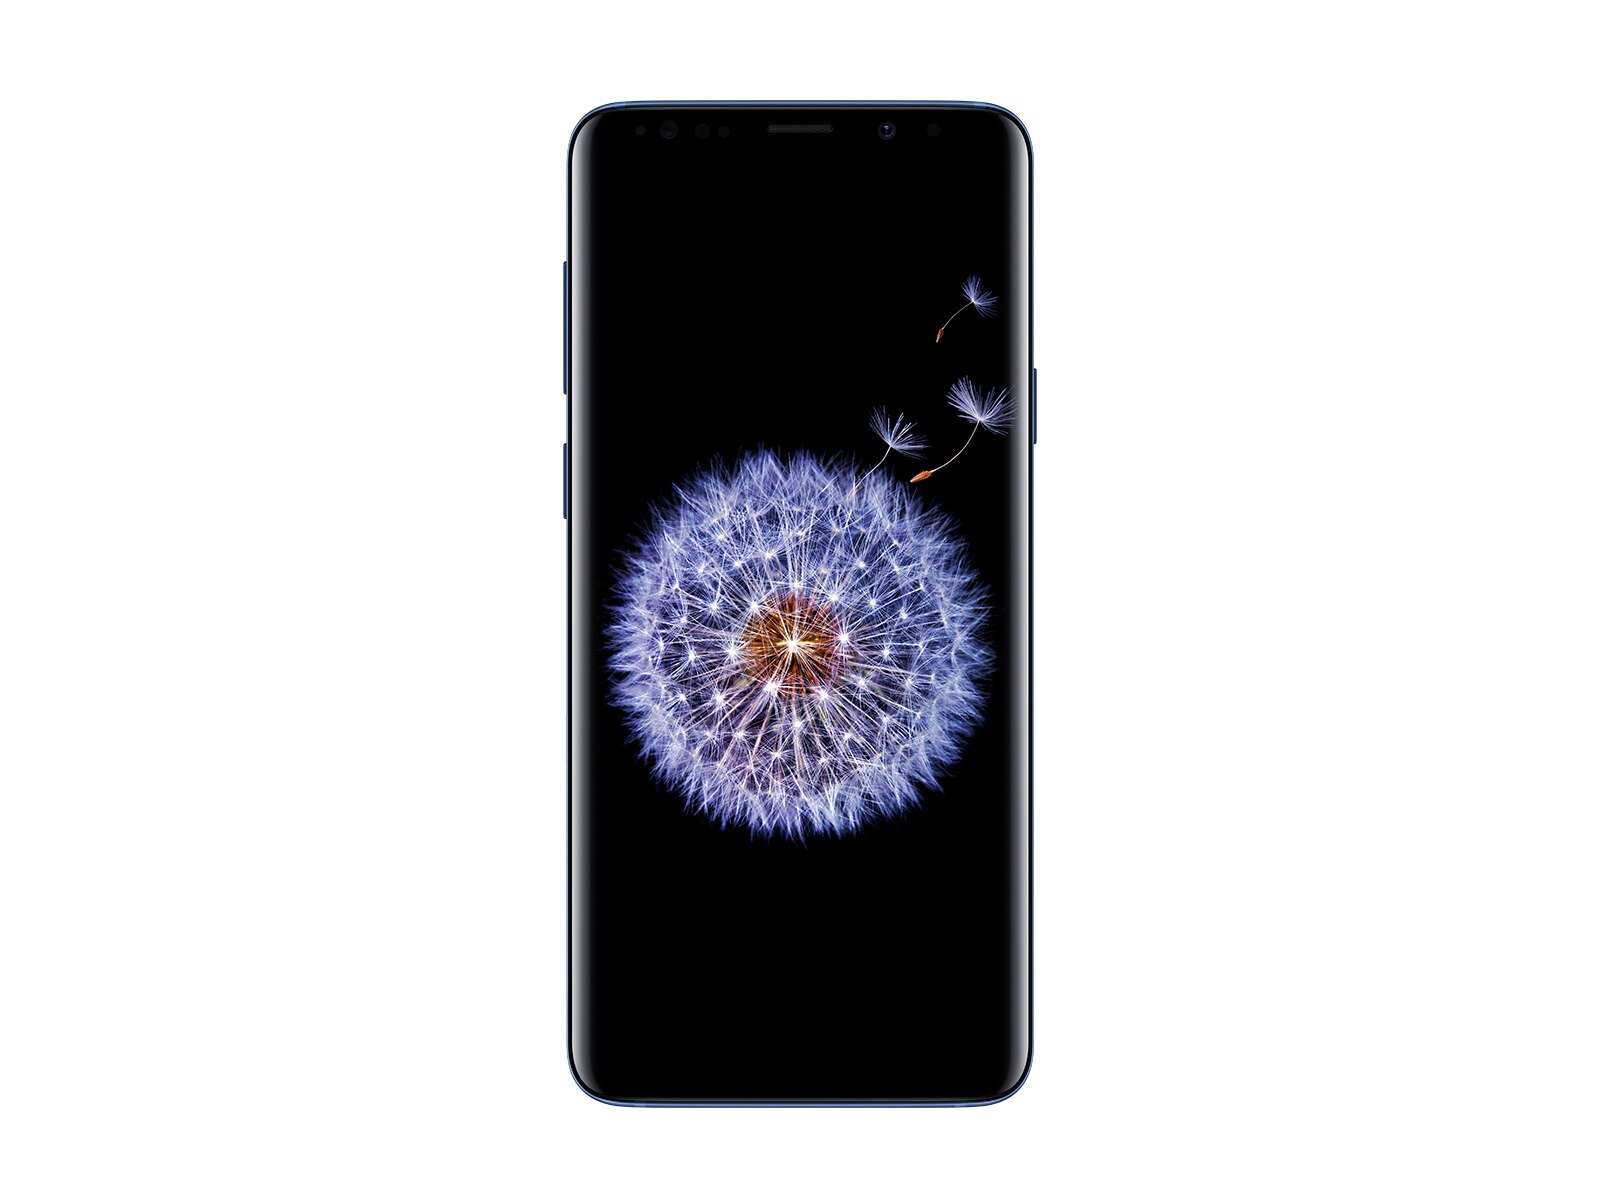 Severe Want shortly Galaxy S9+, Phones Support | Samsung Care US